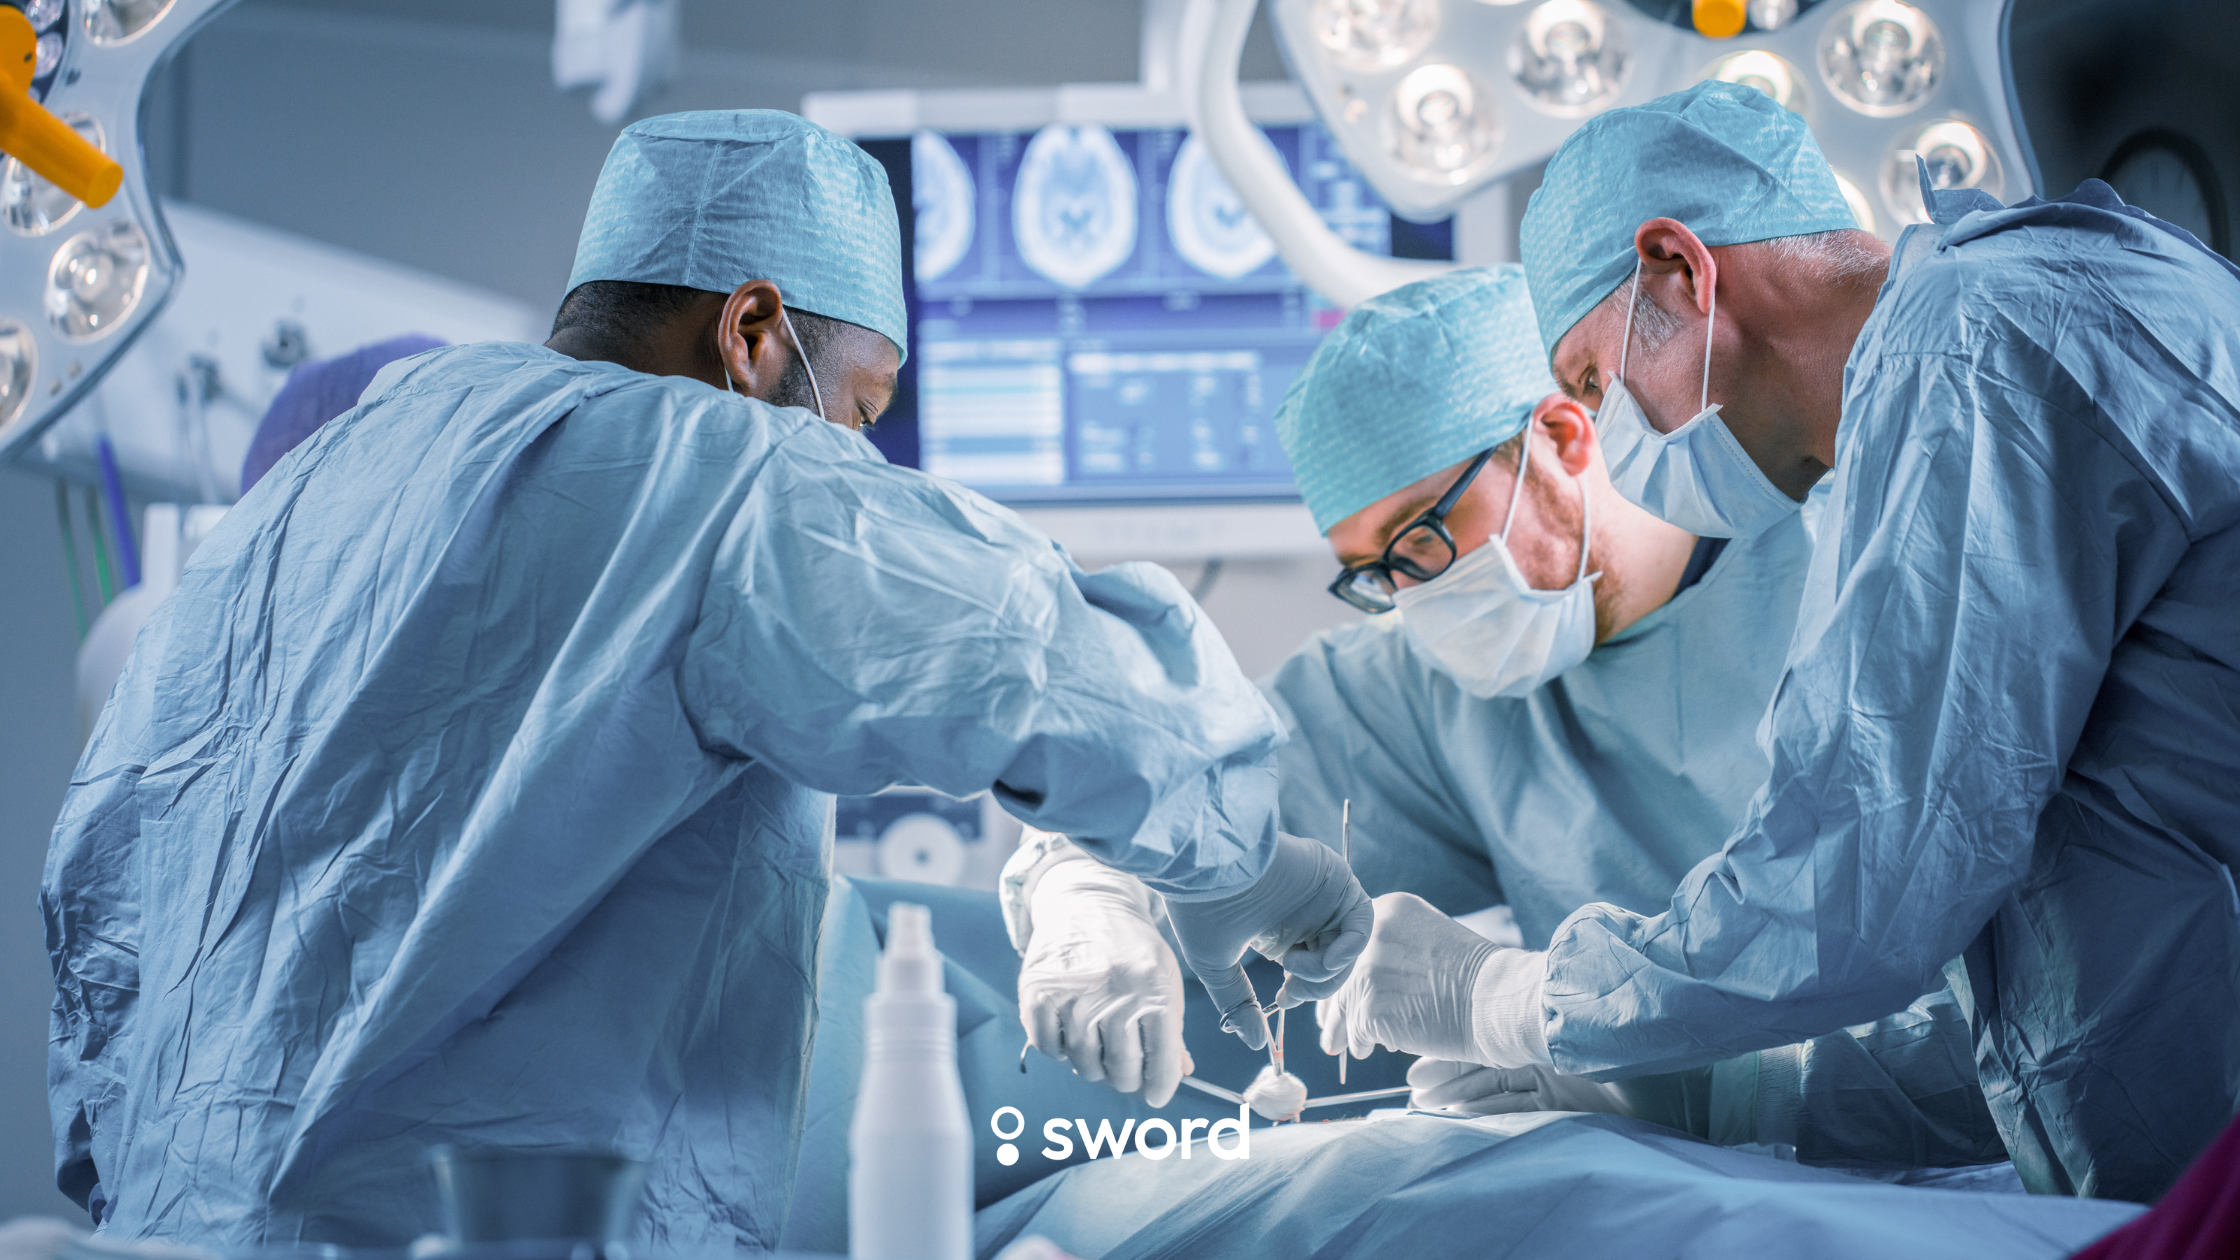 Sword Health reduces member’s surgery intent by 60%